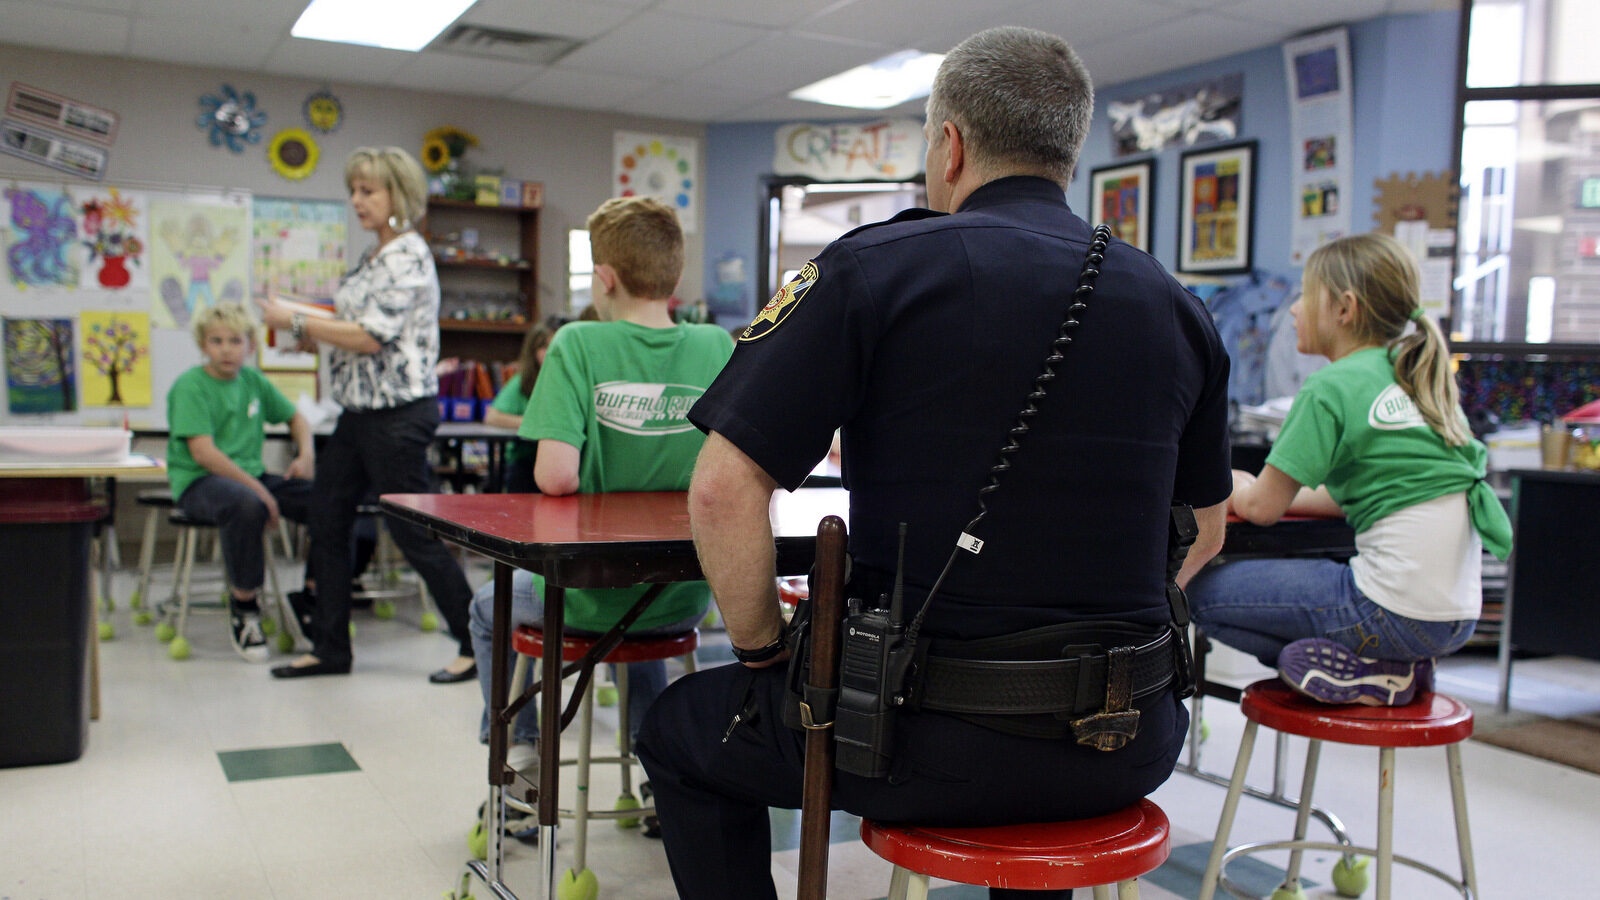 A Douglas County Sheriff sits in on part of an art class at Buffalo Ridge Elementary School, part of a new cooperative effort between law enforcement and schools for more routine police presence at local elementary schools, in Castle Pines, Colo. (AP/Brennan Linsley)